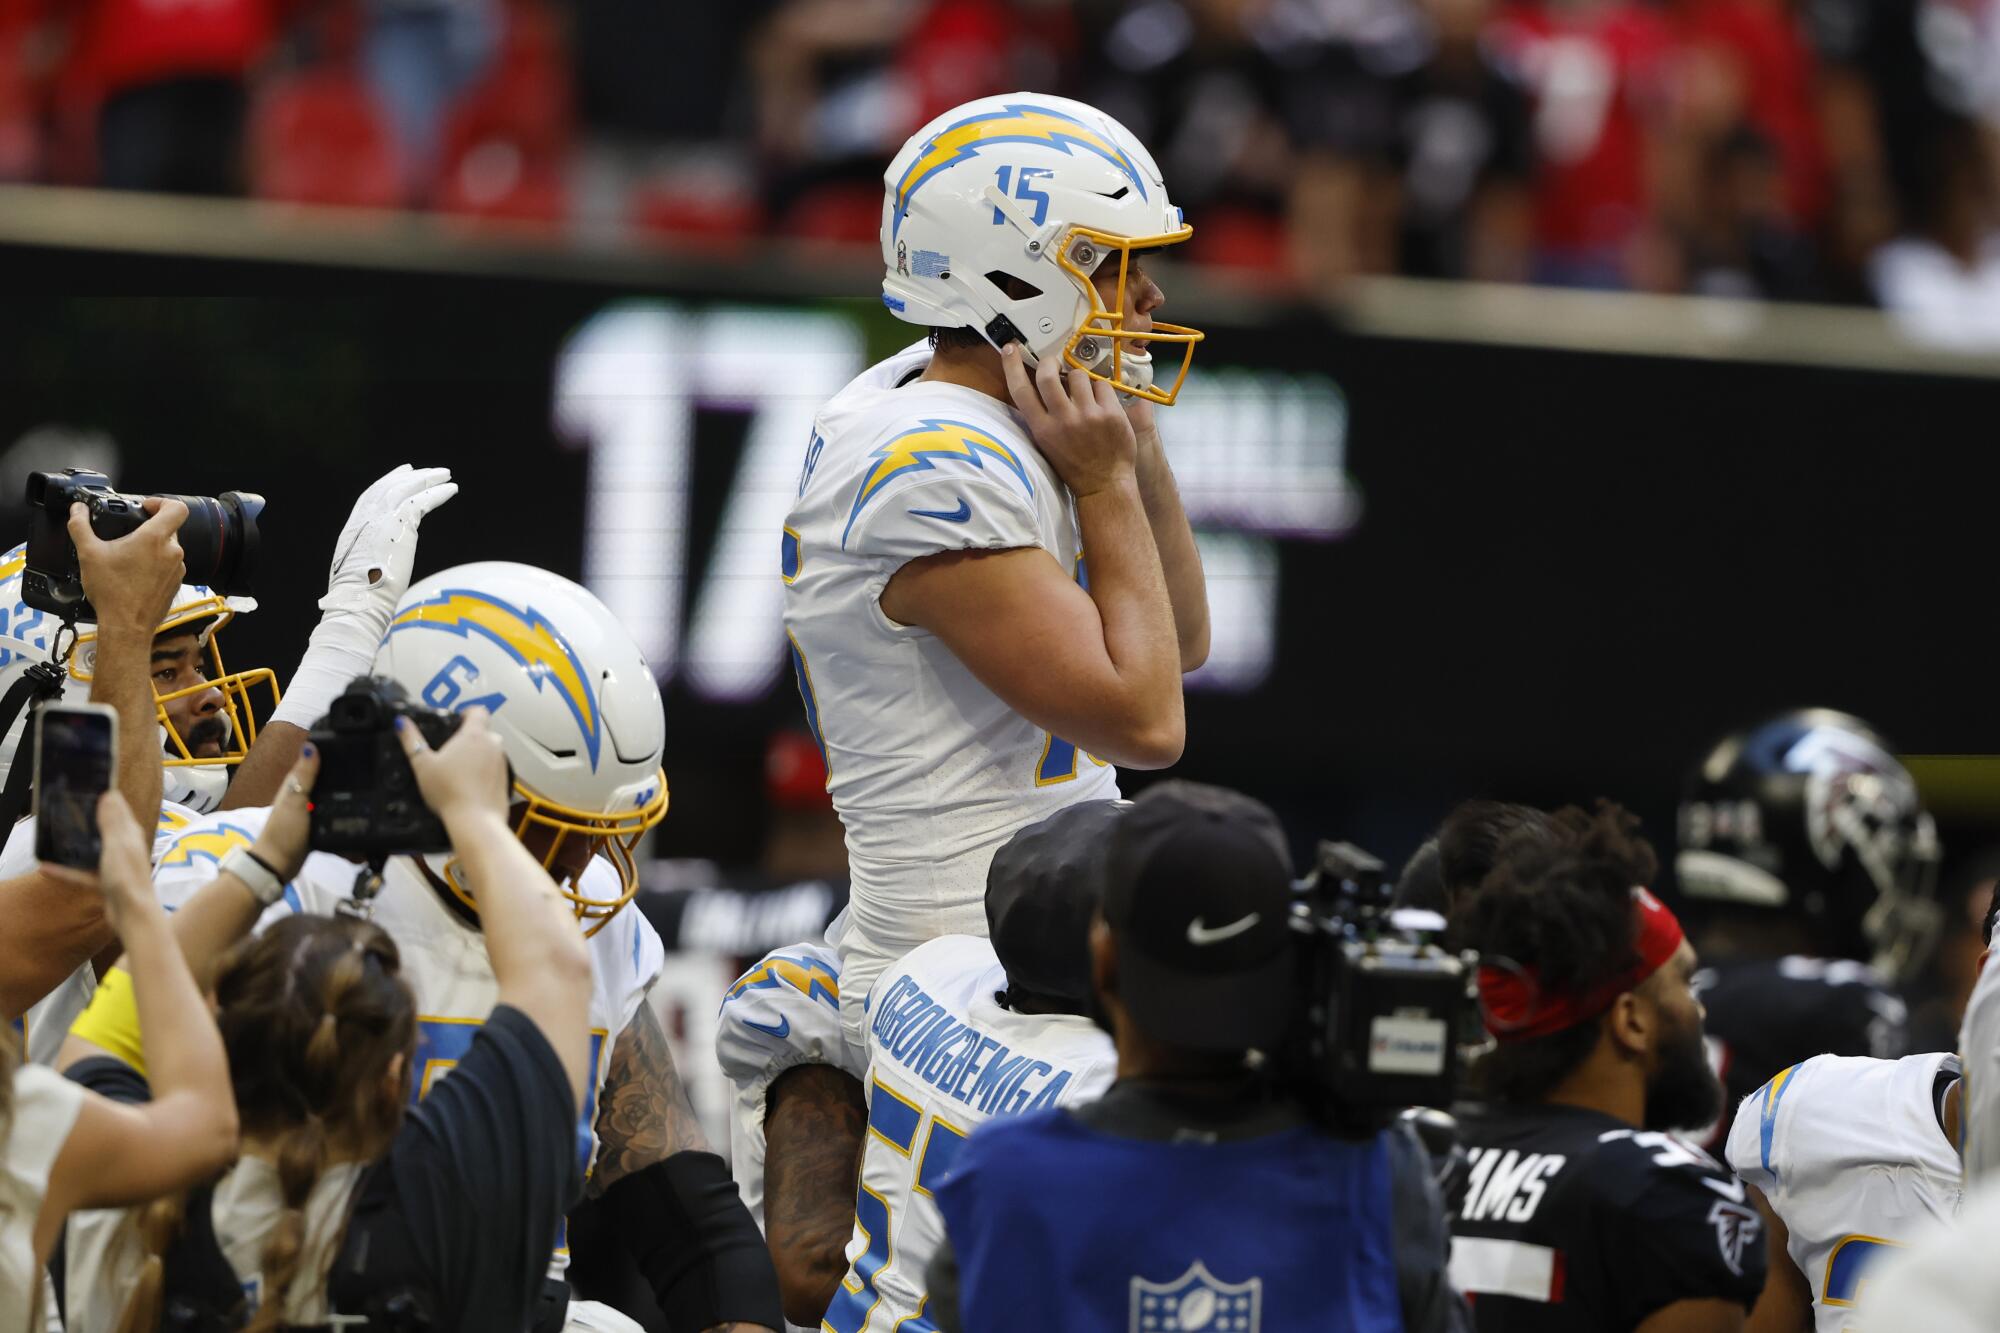 Chargers kicker Cameron Dicker is carried by teammates after making a 37-yard field goal.